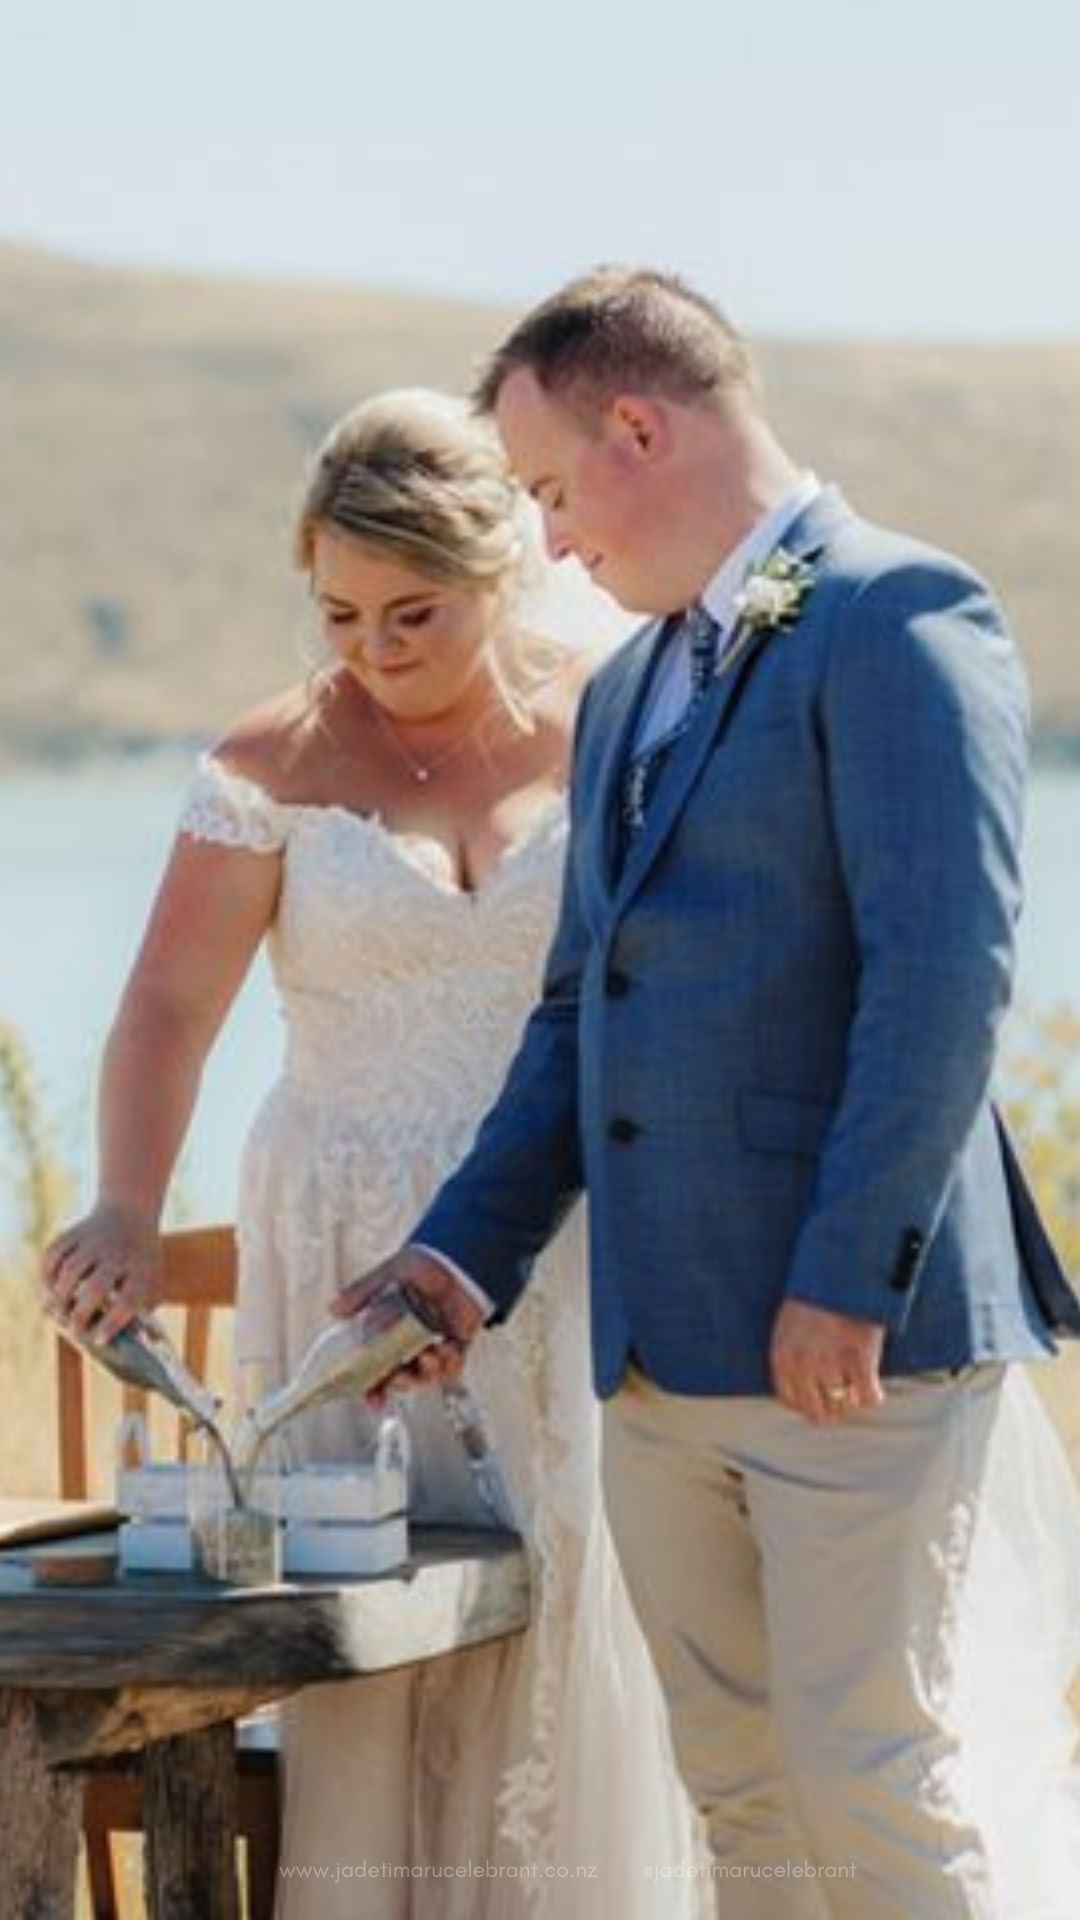 Wedding couple pouring sand into a vase during their marriage ceremony with Jade Whaley celebrant at Lake Tekapo, New Zealand